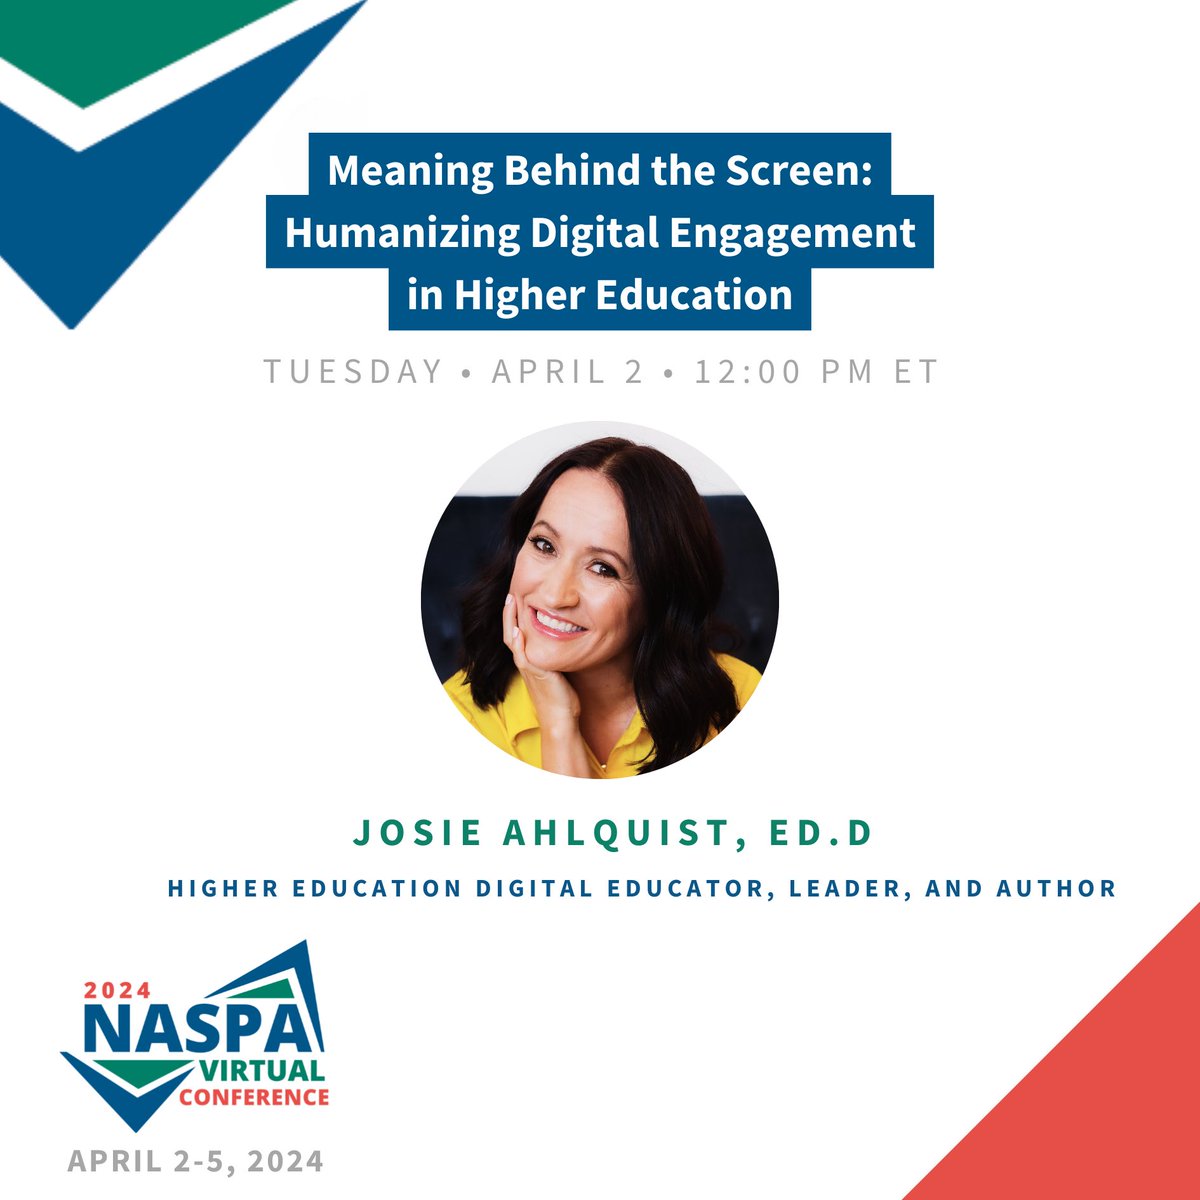 Join my #NASPAVirtual24 keynote on April 2 at 12 pm ET!✨ We'll explore how to harness the power of technology to deepen connections & enrich communities in student affairs. I hope you'll join as we discuss how to create a human-centered approach to digital engagement!